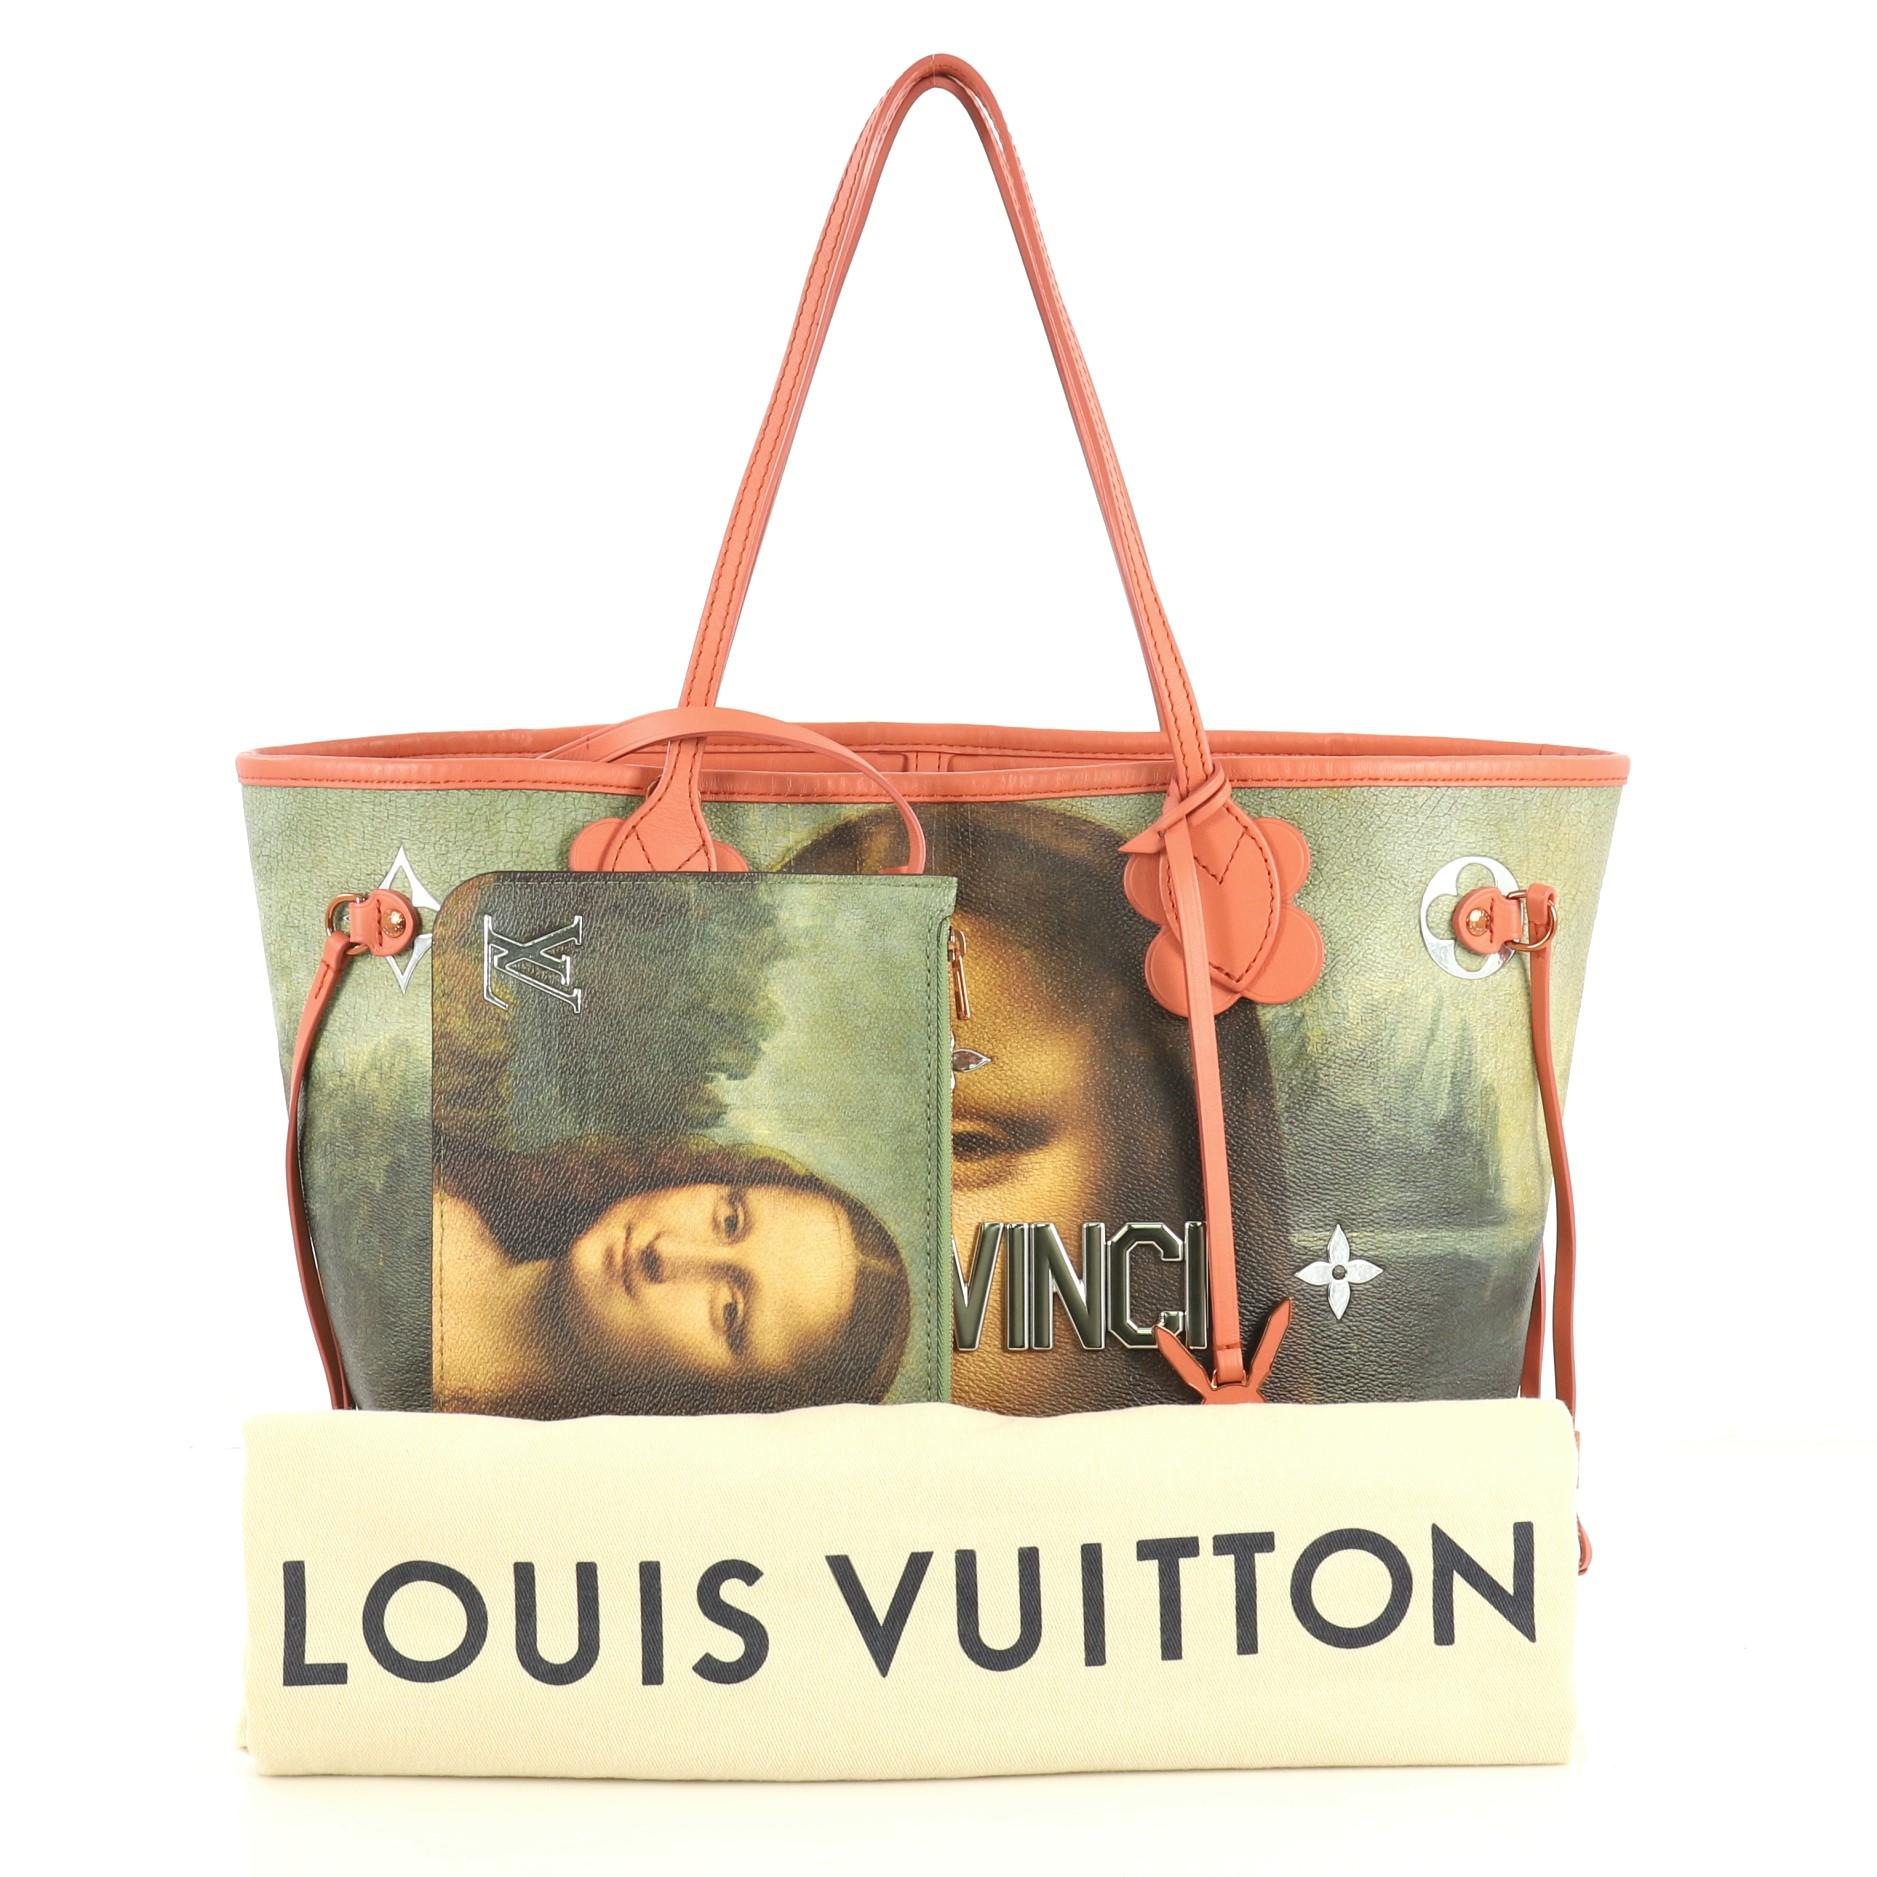 This Louis Vuitton Neverfull NM Tote Limited Edition Jeff Koons Da Vinci Print Canvas MM, crafted from multicolor printed coated canvas, features dual slim leather handles, monogram and flower applique, reflective metallic letters, and rose gold and